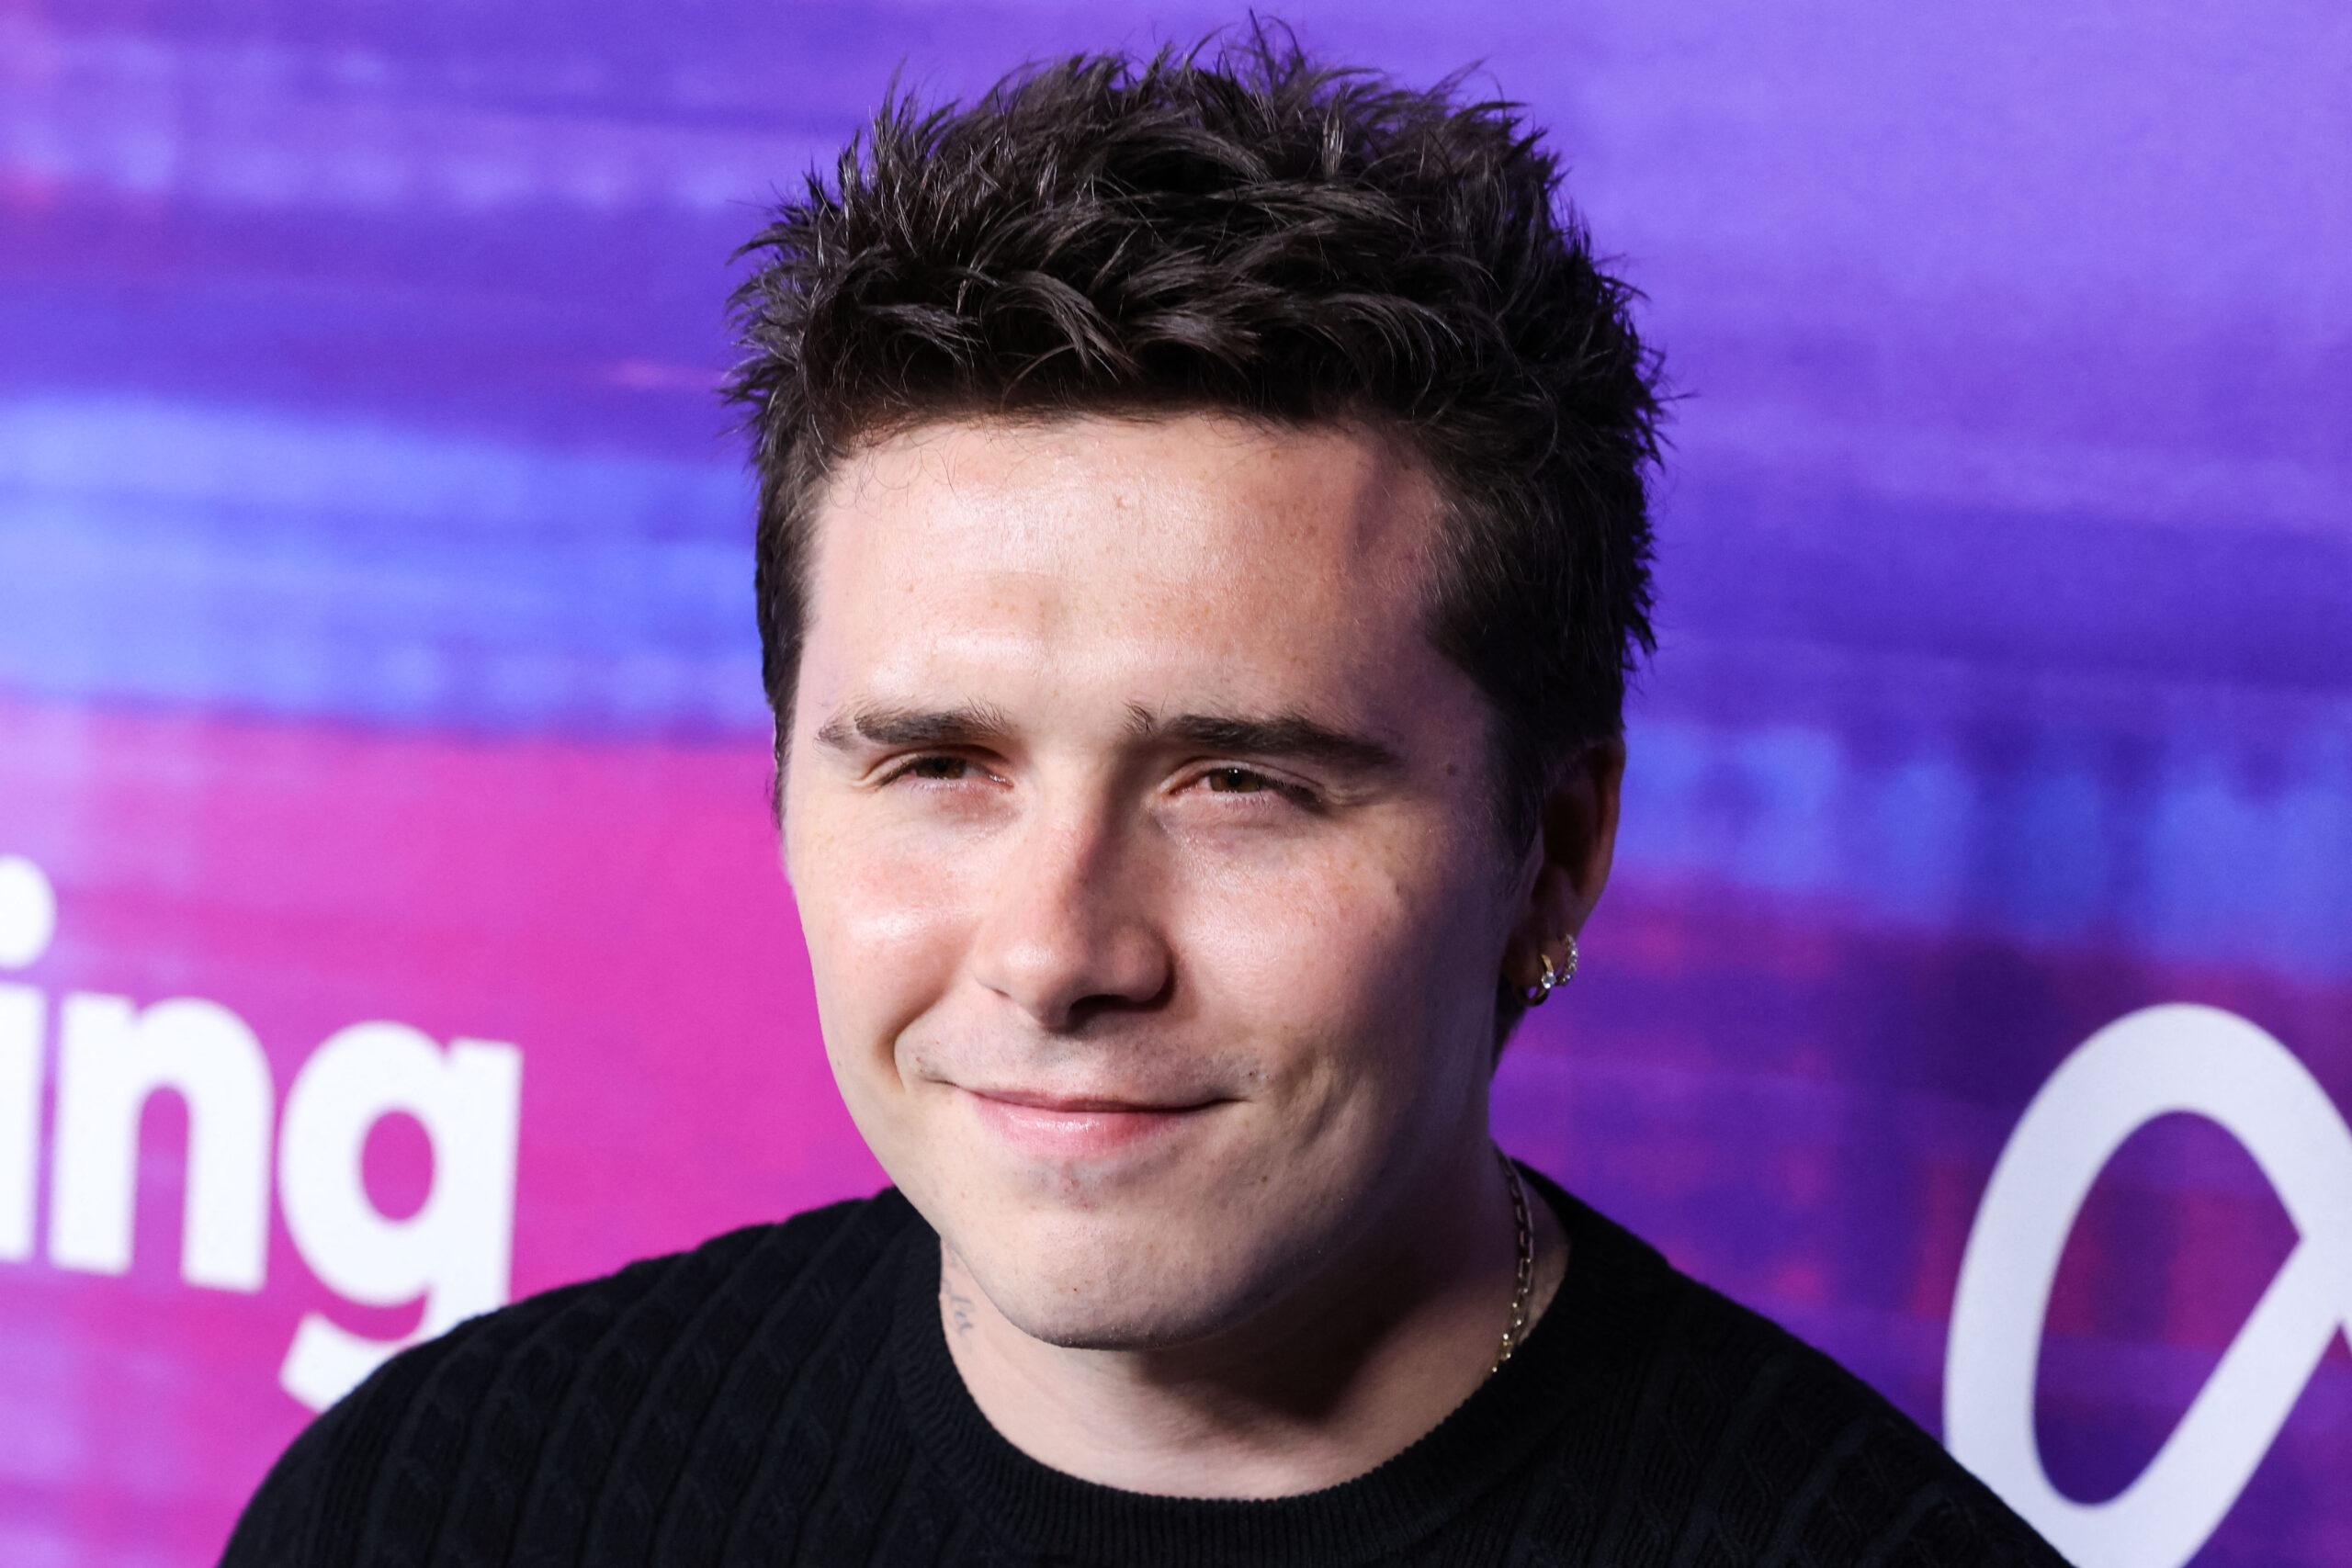 Brooklyn Beckham at the Variety 2022 Power Of Young Hollywood Celebration